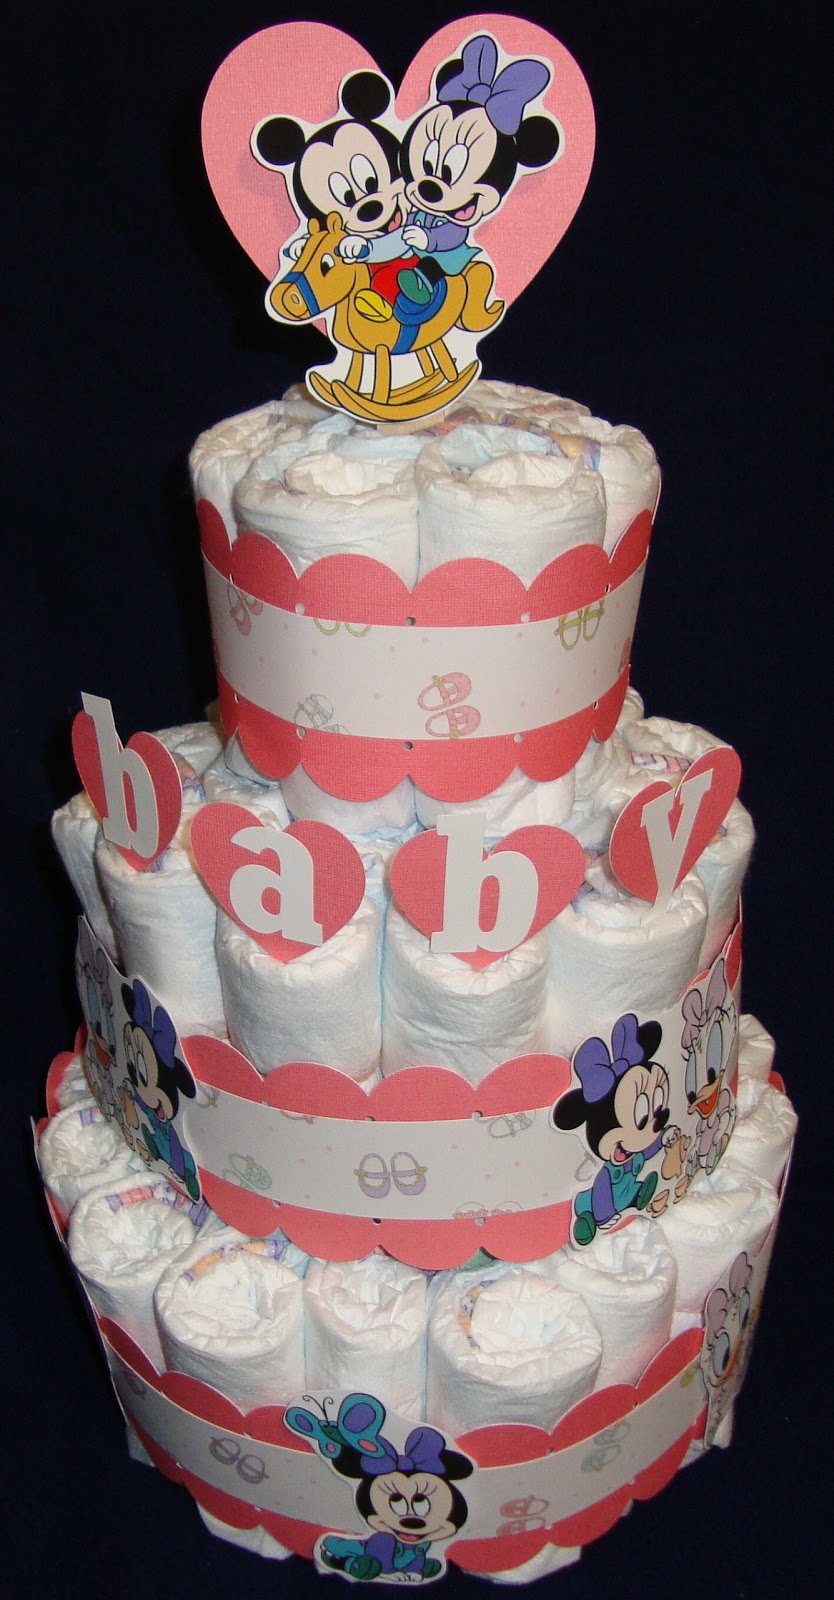 Glora's Crafts: Disney Diaper Cake with an Action Wobble